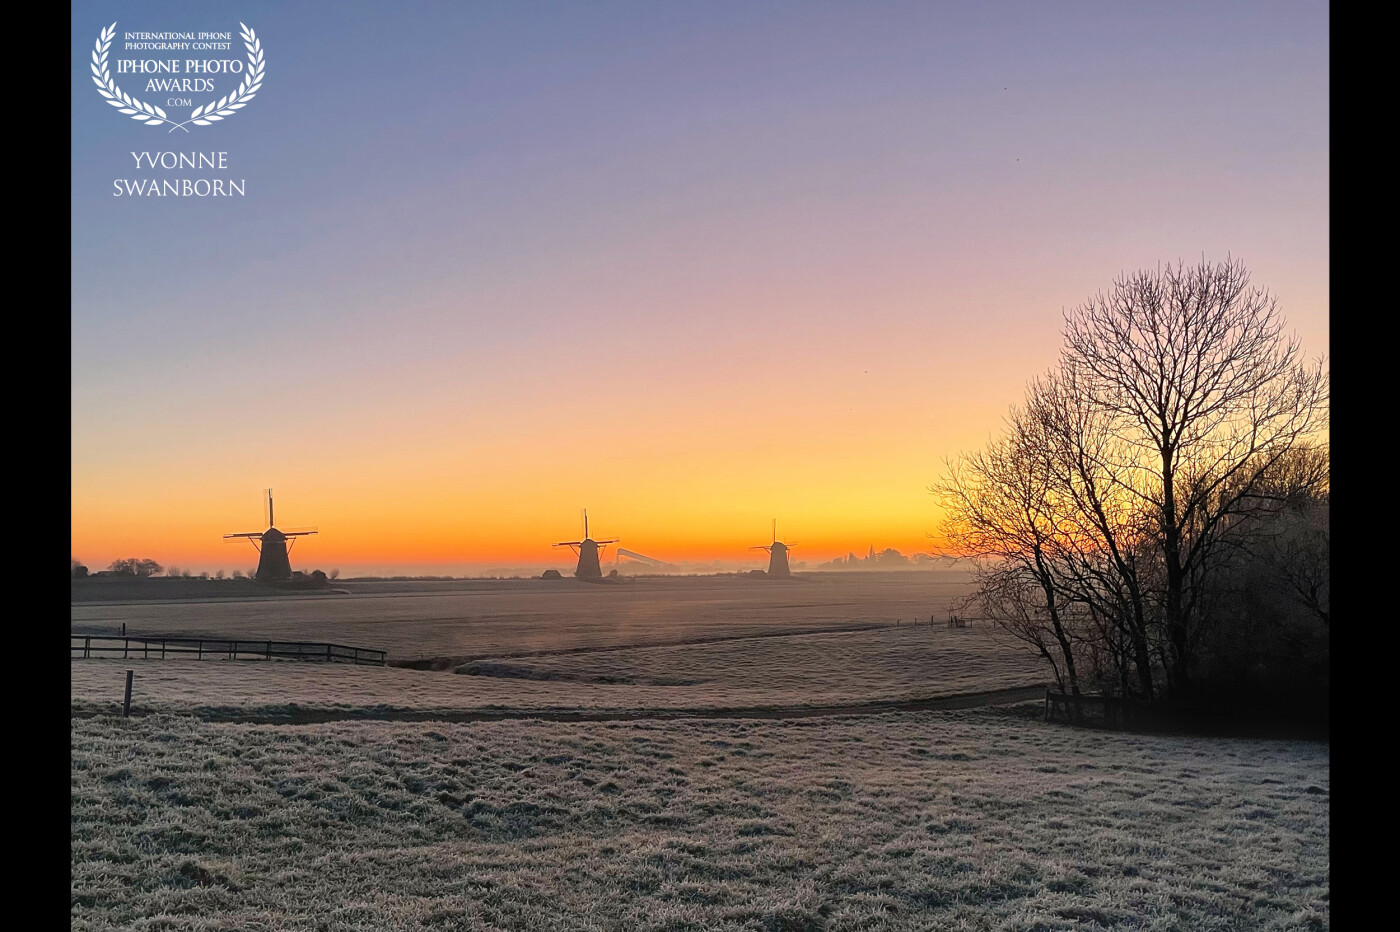 On my way to work I saw this incredible sunrise. I just had to pull over my car to capture this view with its three mills in a little frozen landscape.